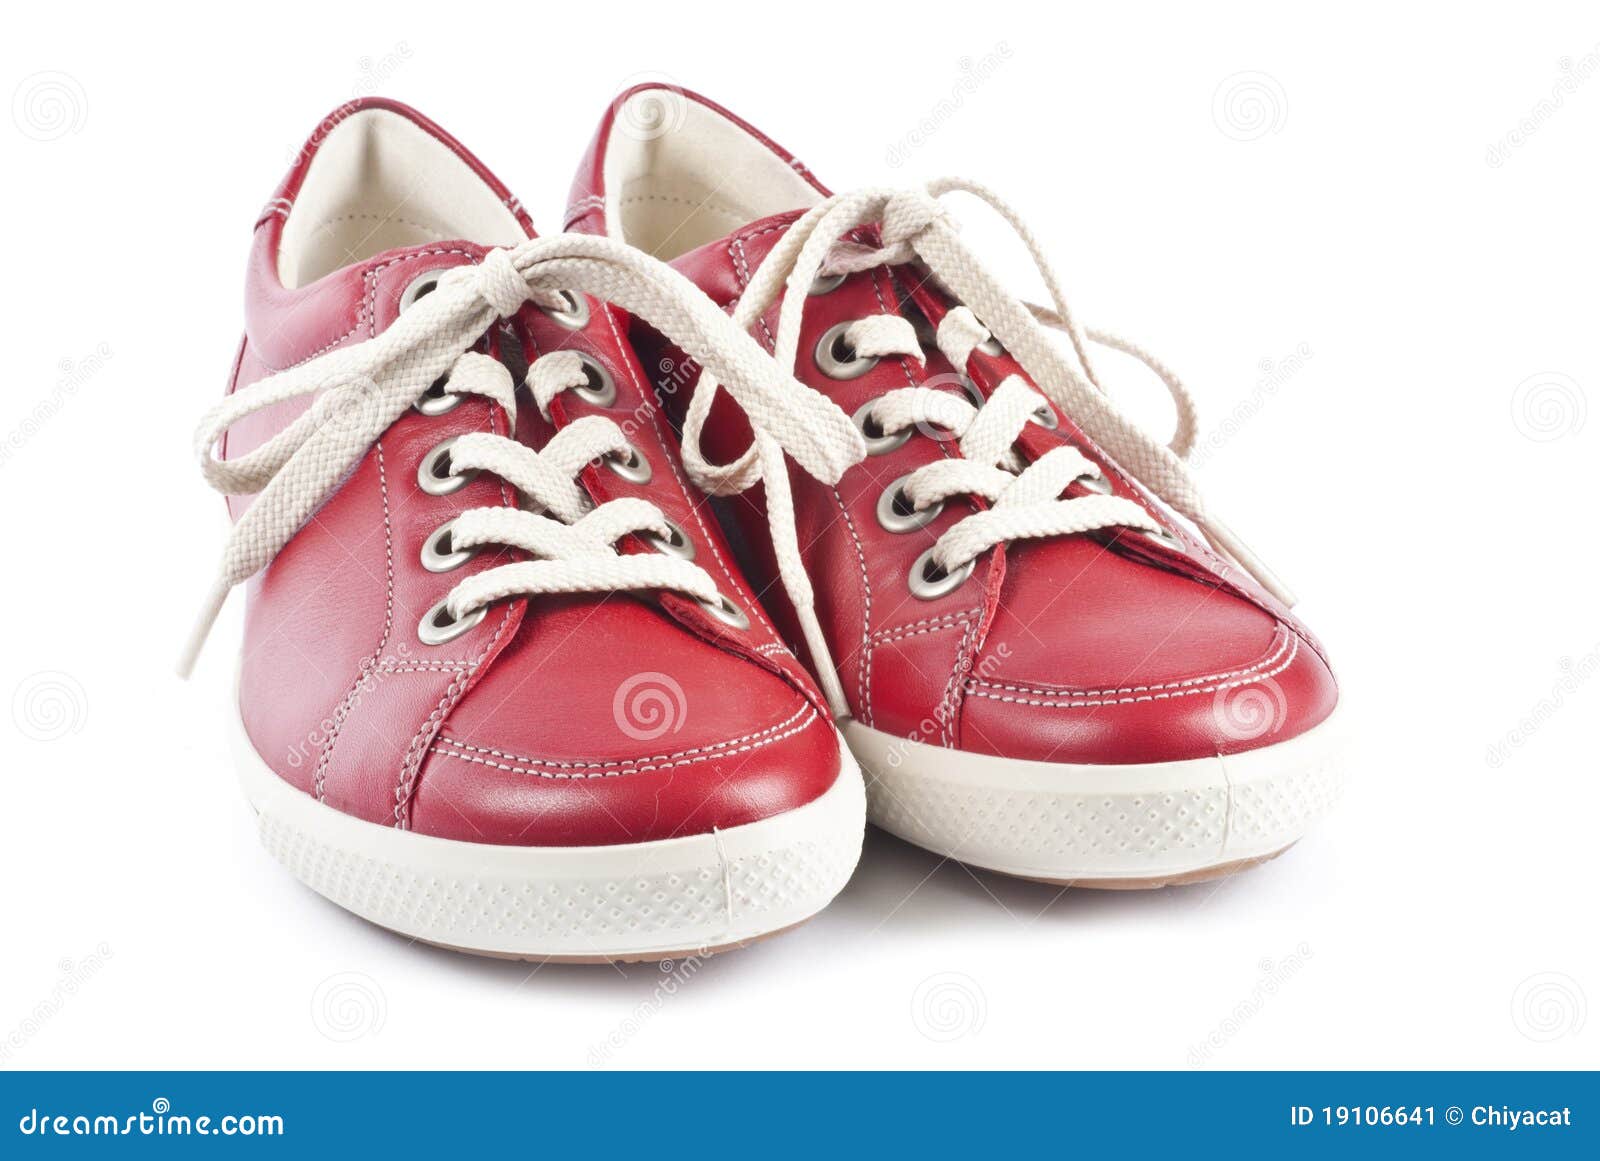 Red Leather Running Shoes stock image. Image of female - 19106641